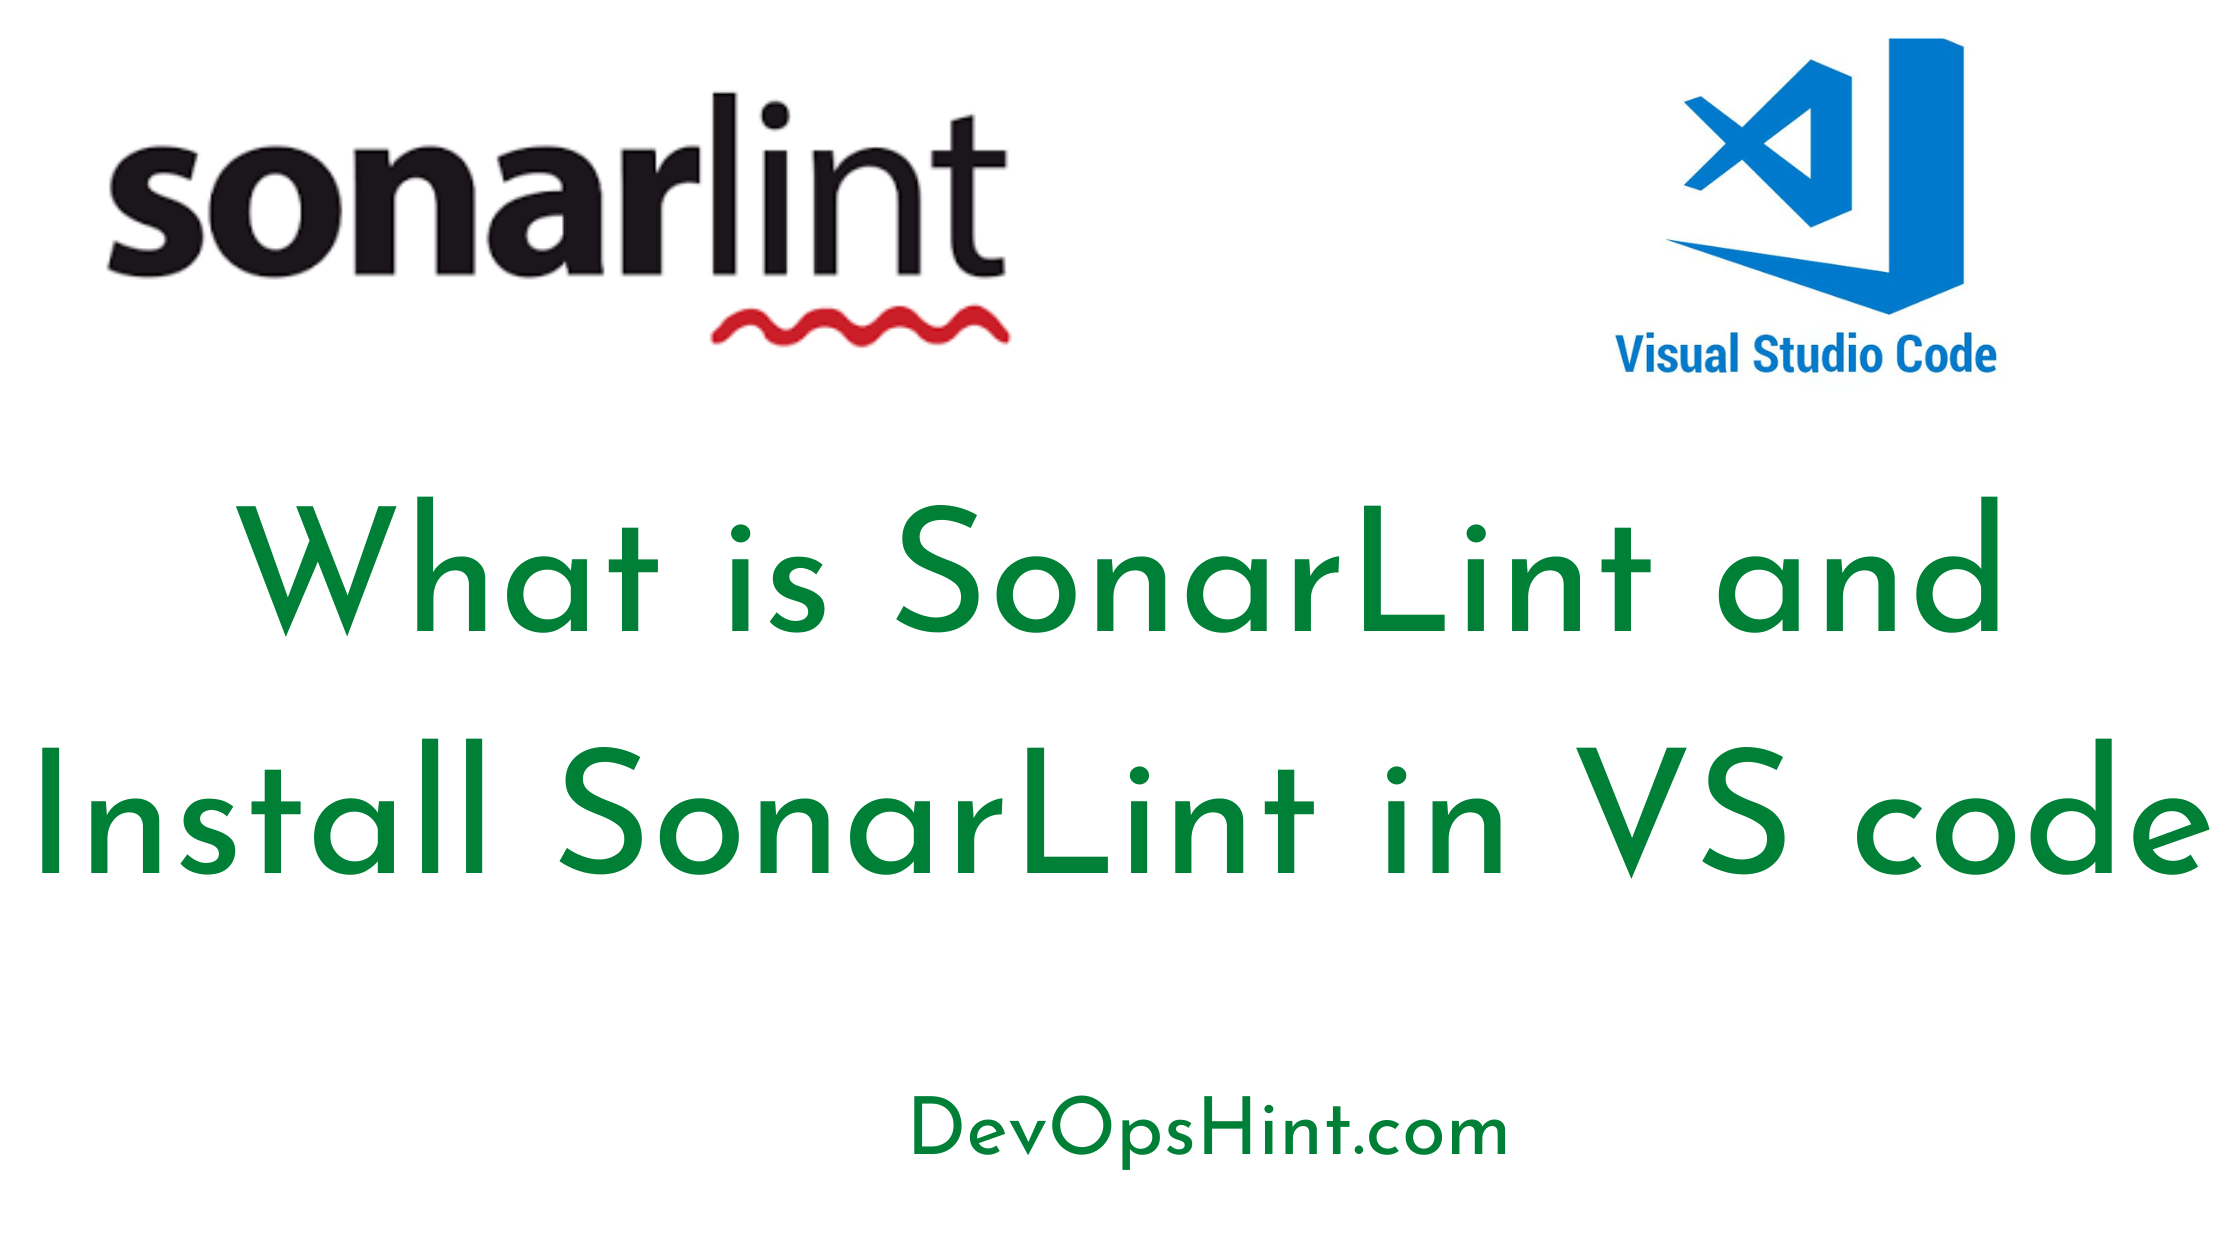 What is SonarLint and Install SonarLint in VS code